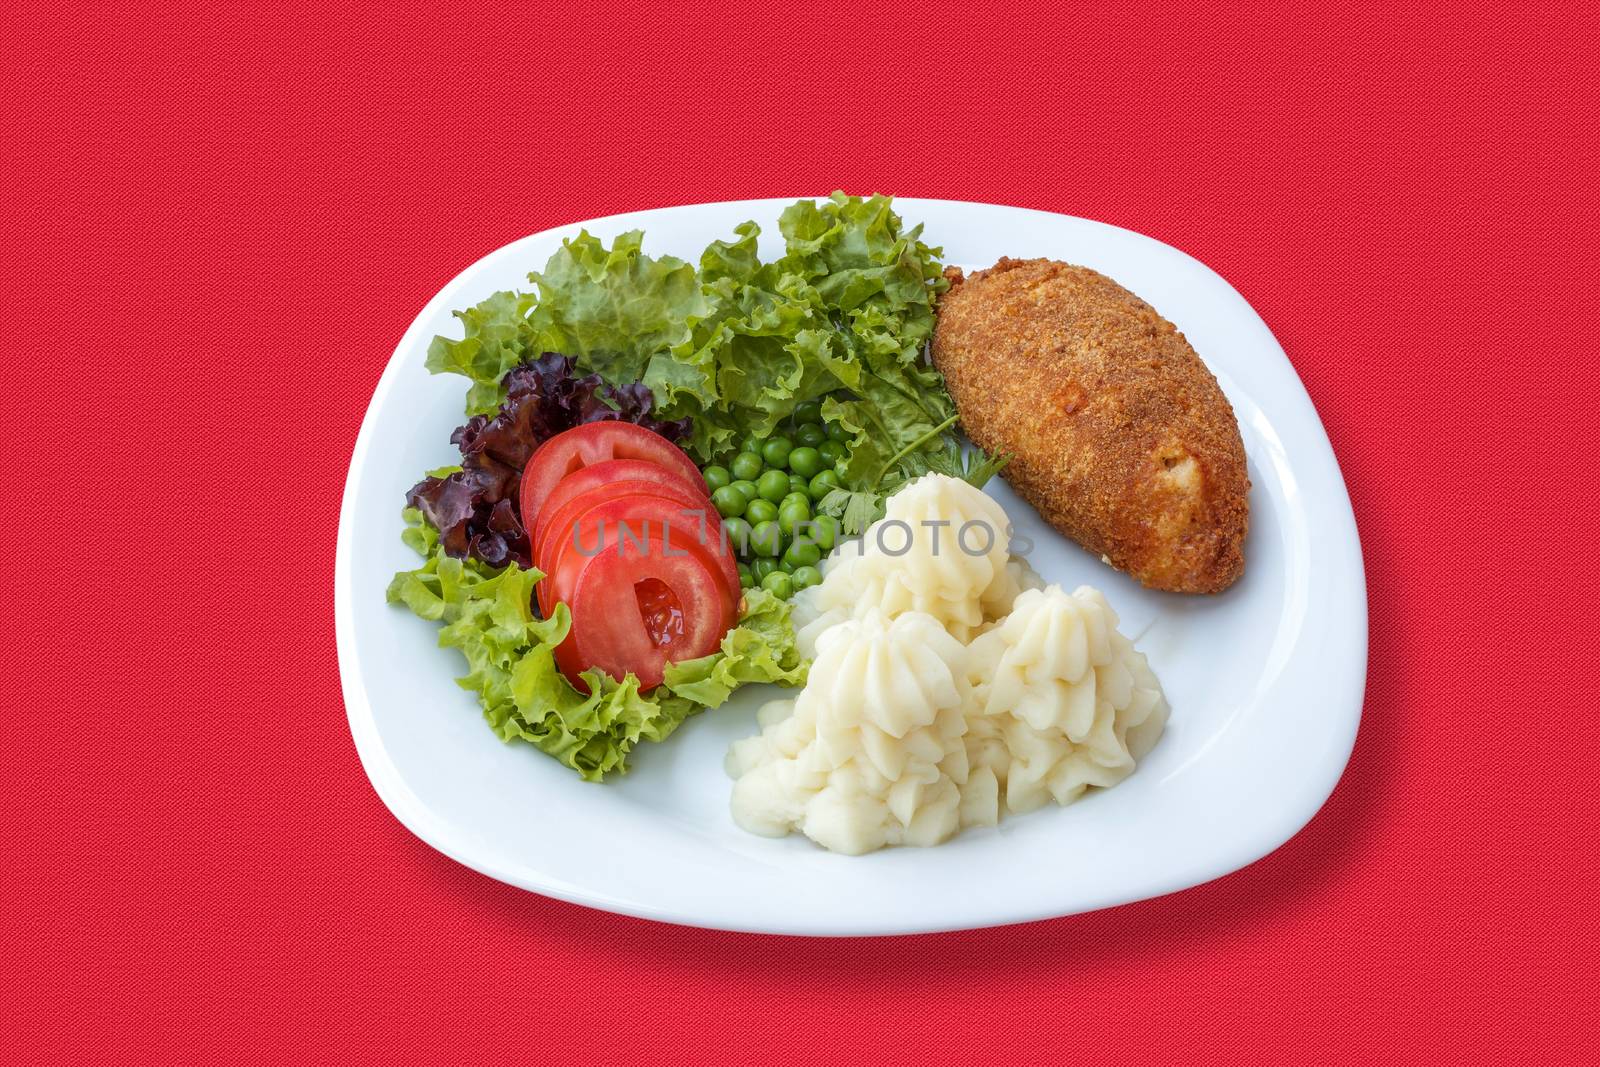 Mashed potatoes with cutlet and vegetables by fogen